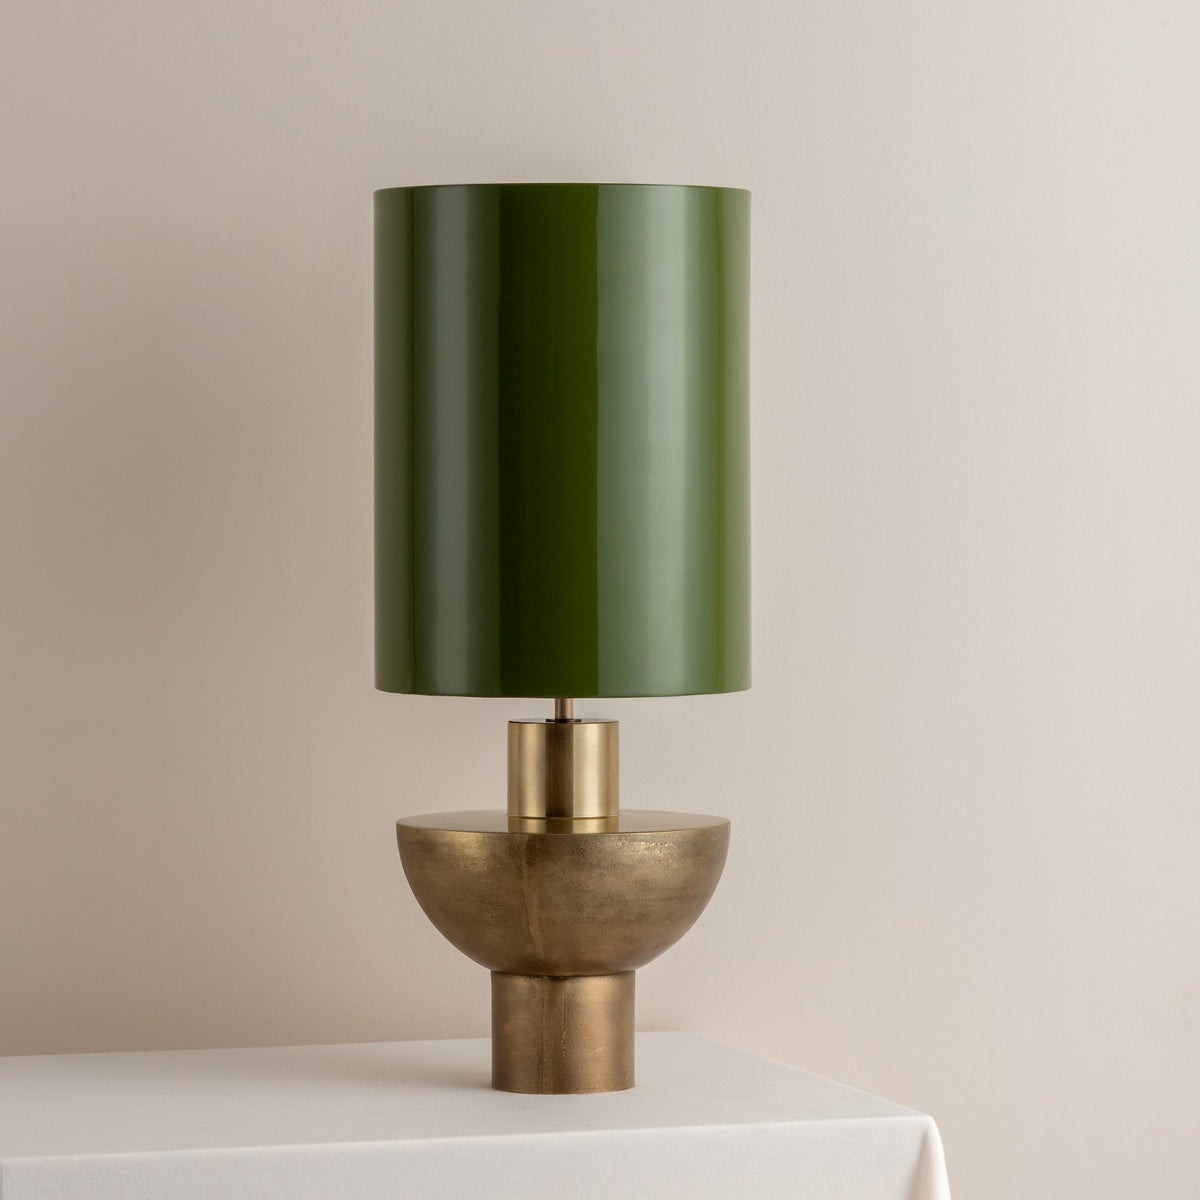 Editions brass lamp with + green lacquer shade, Table Lamp, £450, Lights  & Lamps, Modern Designer Lighting